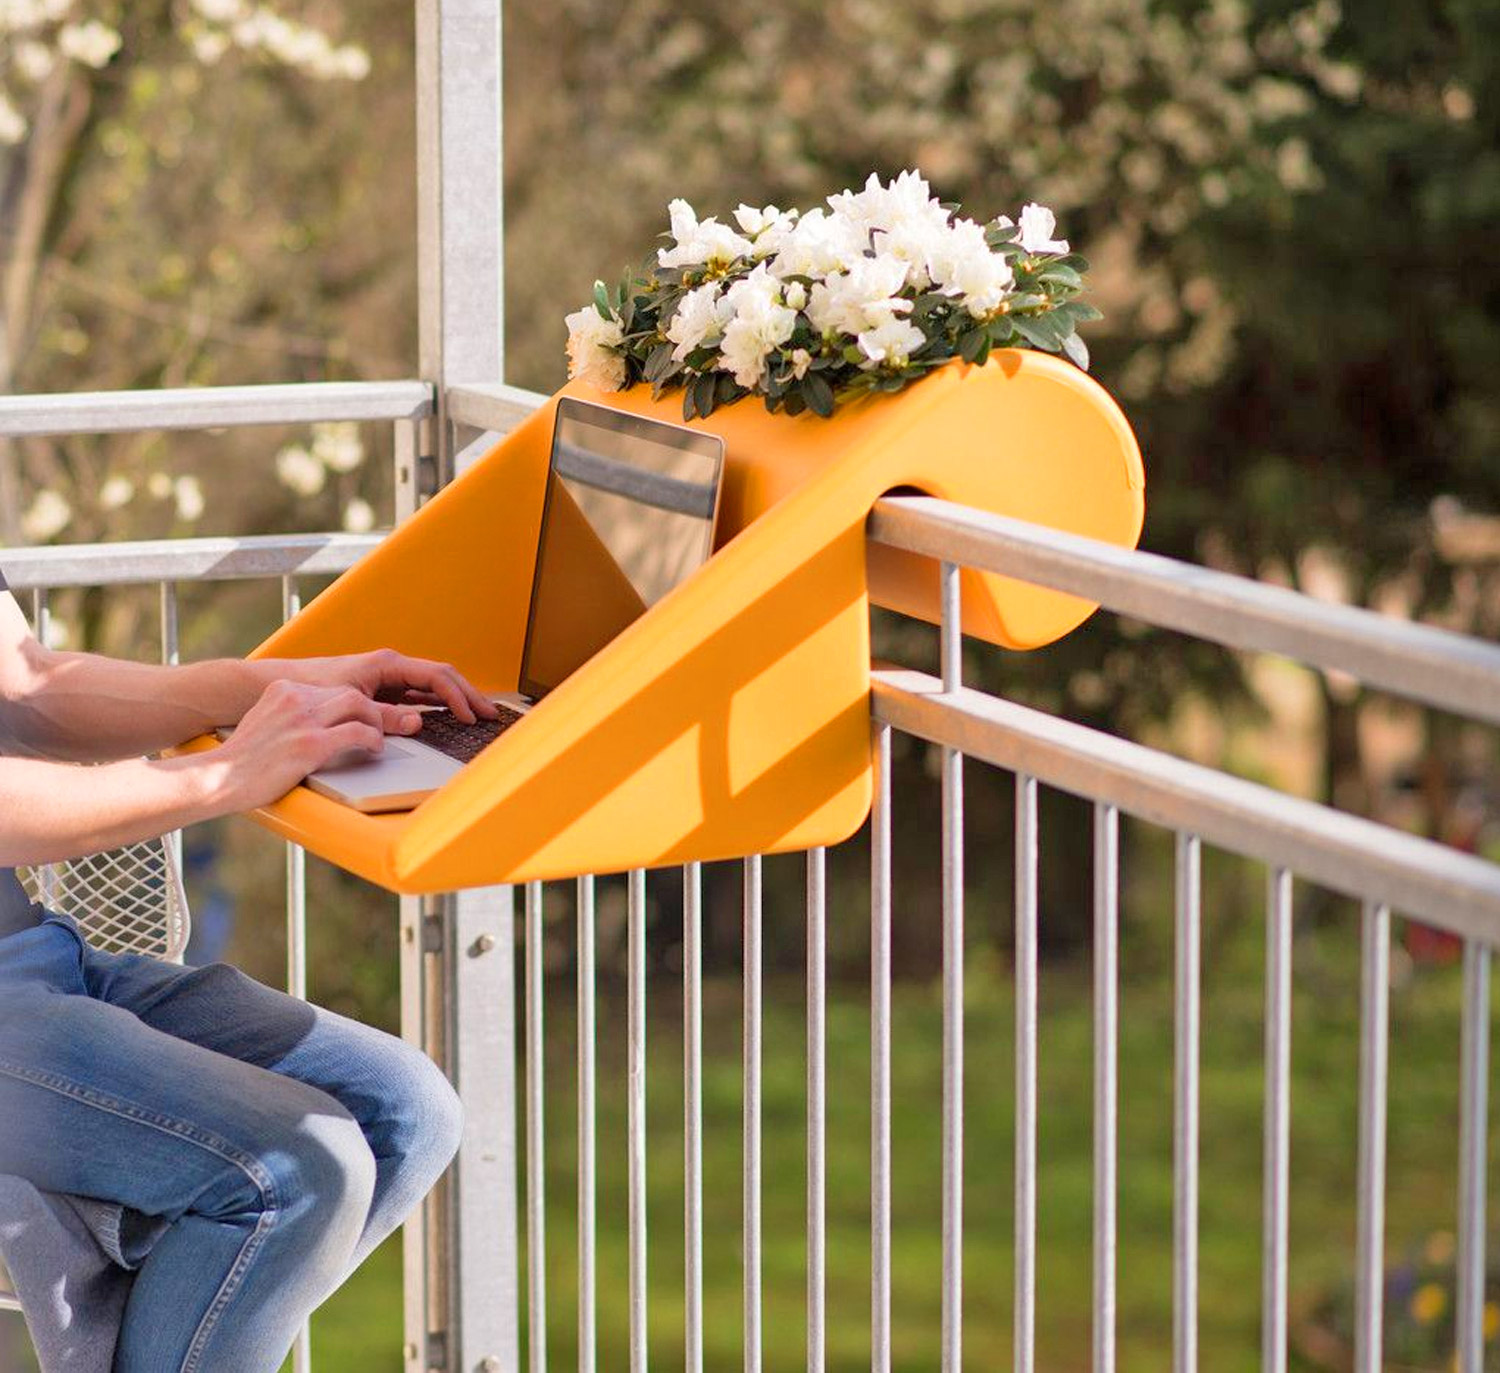 A girl working on a laptop on a yellow-colored mini balcony desk with a flower pot inside it